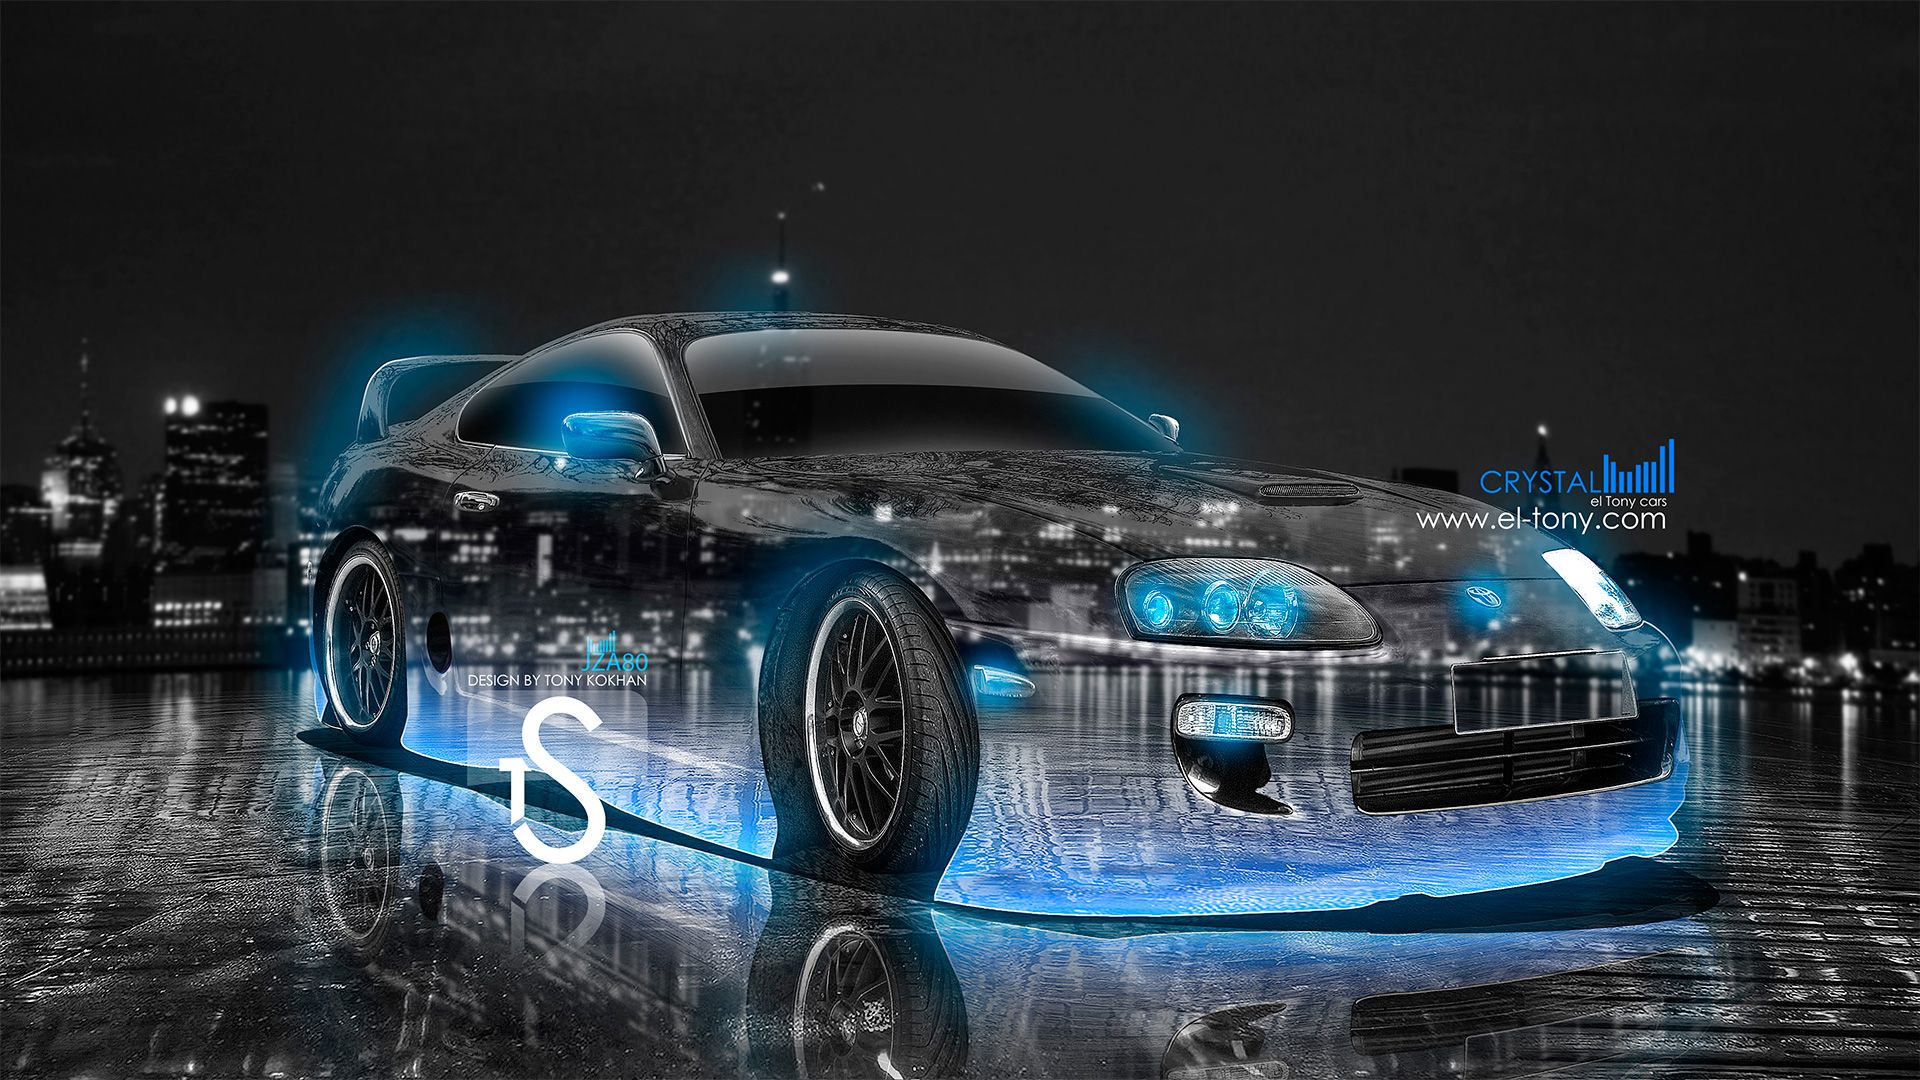 Cars with Neon Lights Wallpaper. Awesome Cars Wallpaper, Disney Cars Wallpaper and Cool Cars Wallpaper